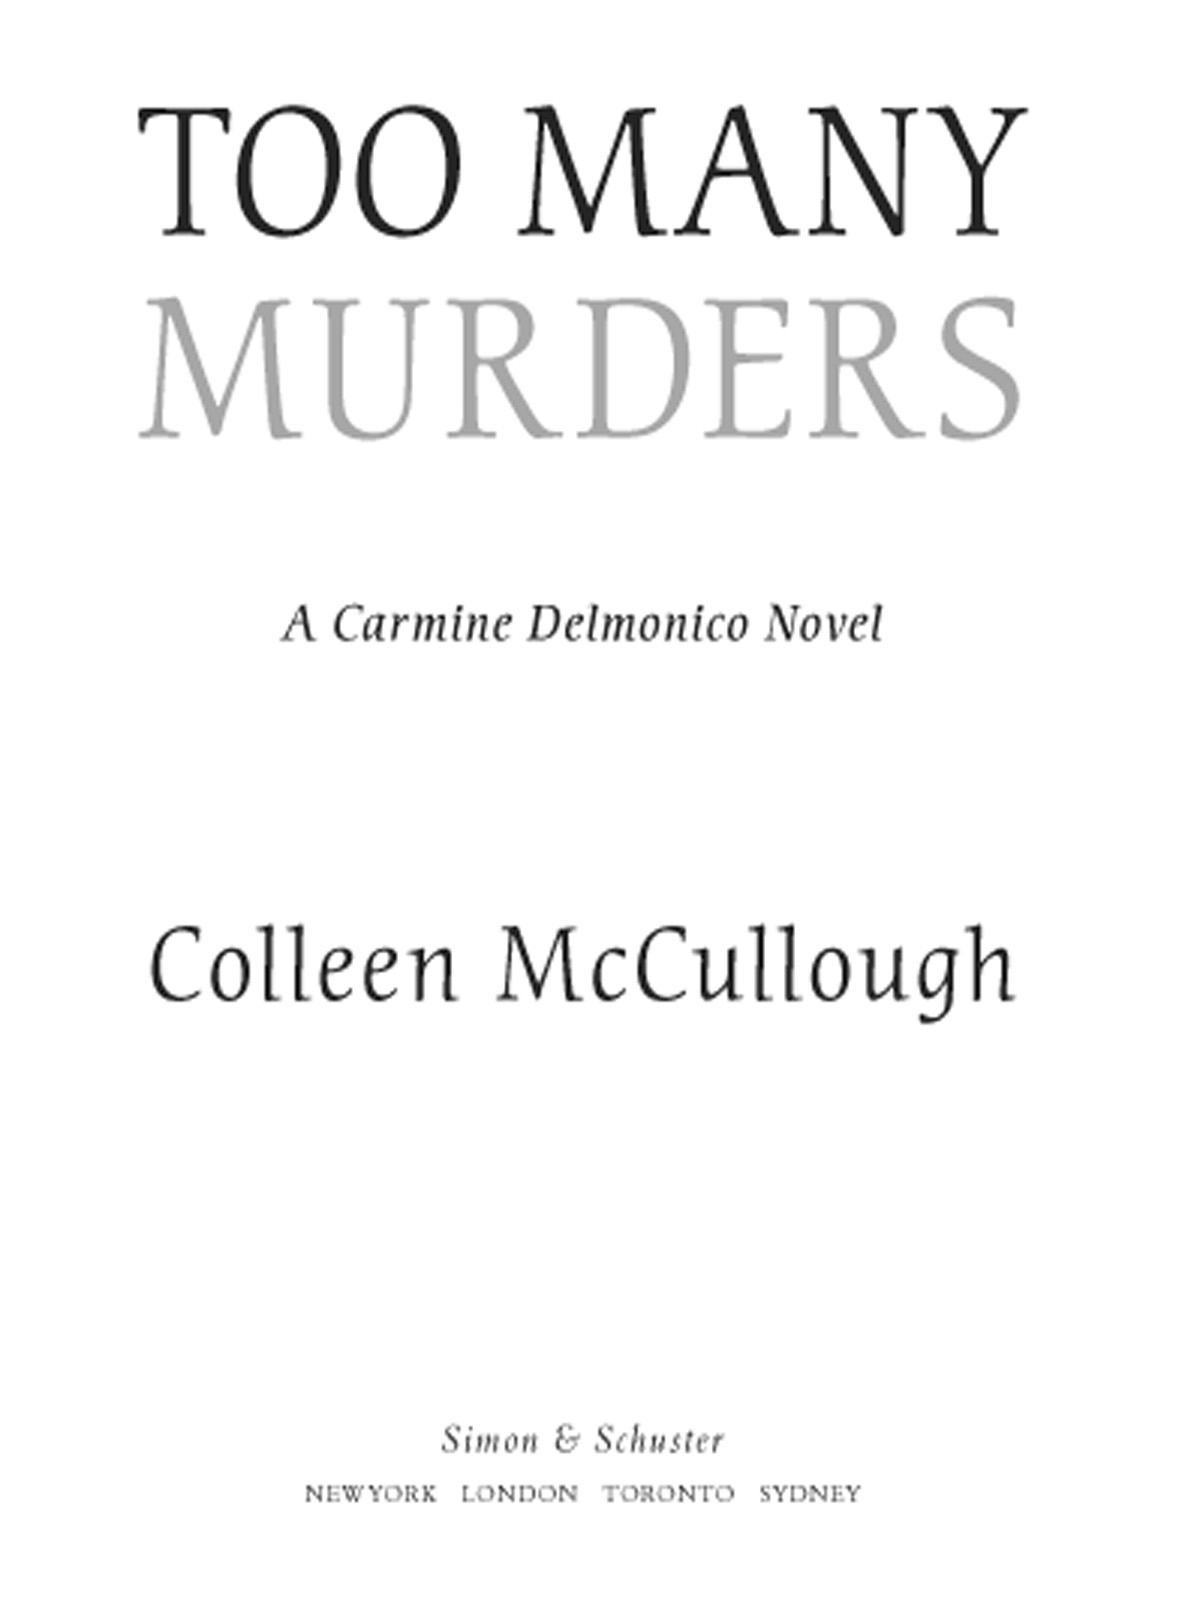 Too Many Murders (2009) by Colleen McCullough